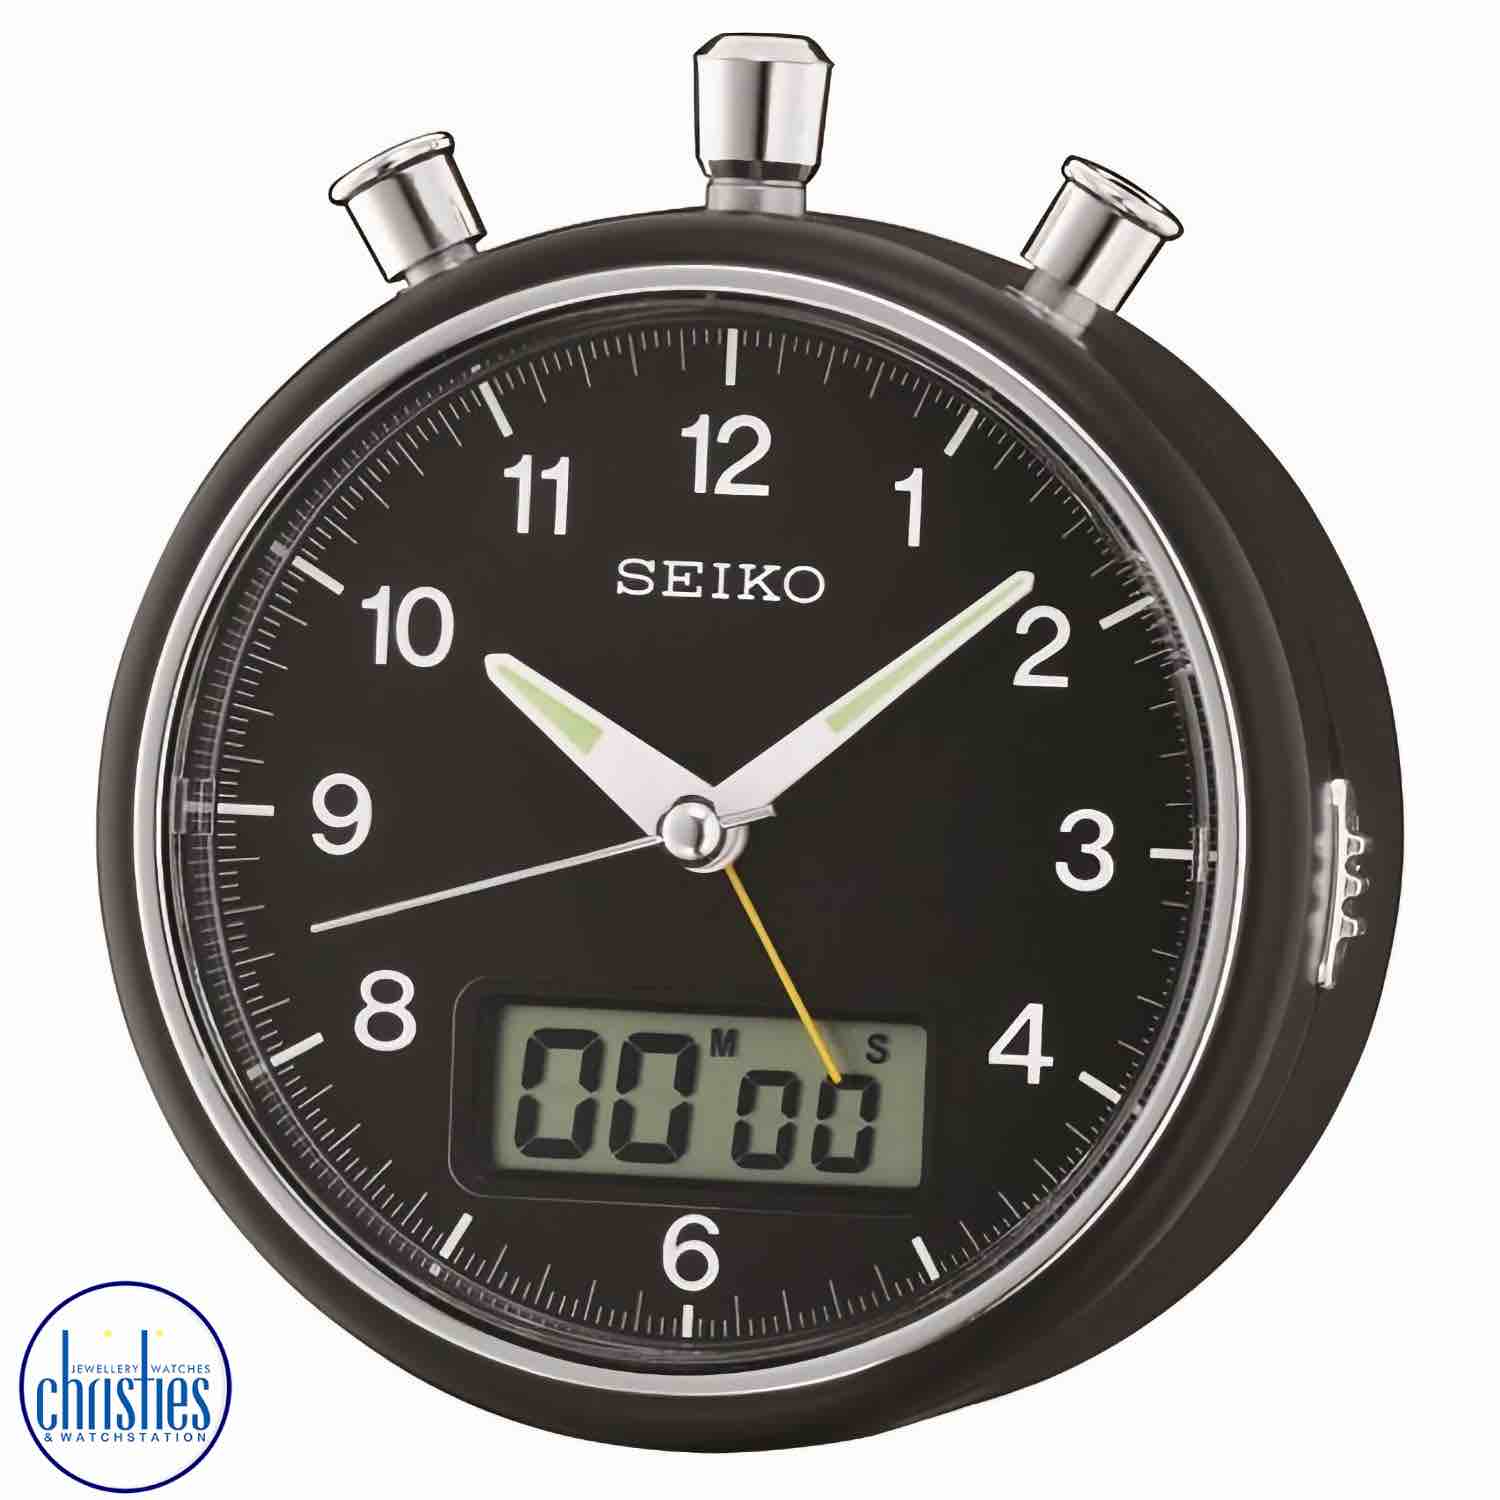 QHE114-K Seiko Alarm Clock with Timer & Stopwatch. The QHE114-K Seiko Alarm Clock with Timer & Stopwatch is the perfect addition to any bedside table.